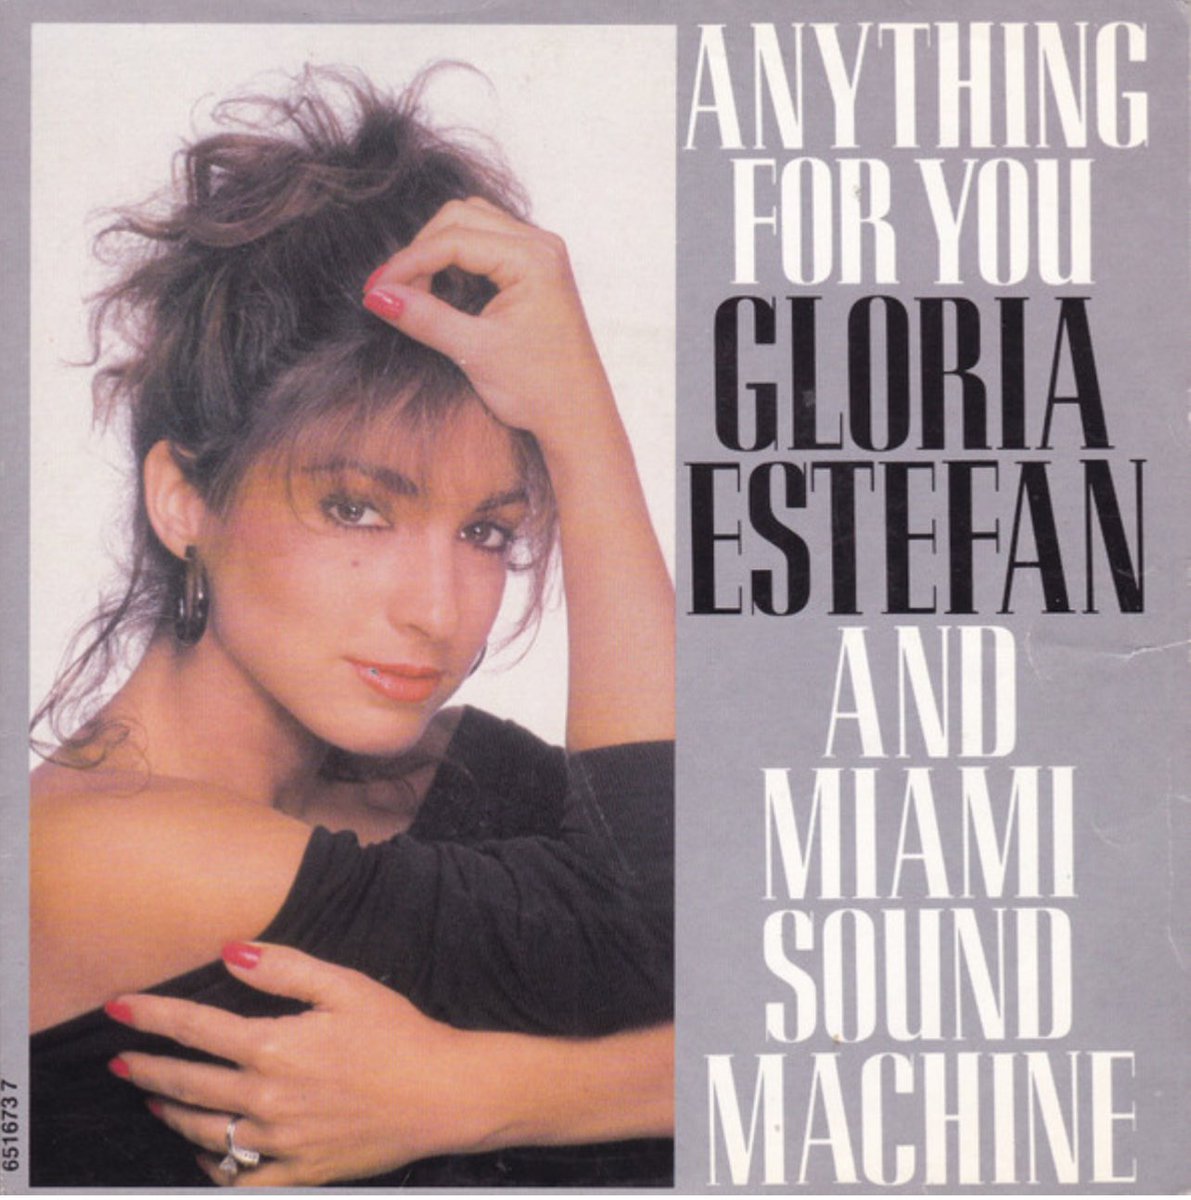 Today in 1988, #GloriaEstefan & Miami Sound Machine hit #1 on the Billboard Hot 100 with “Anything for You.” @GloriaEstefan